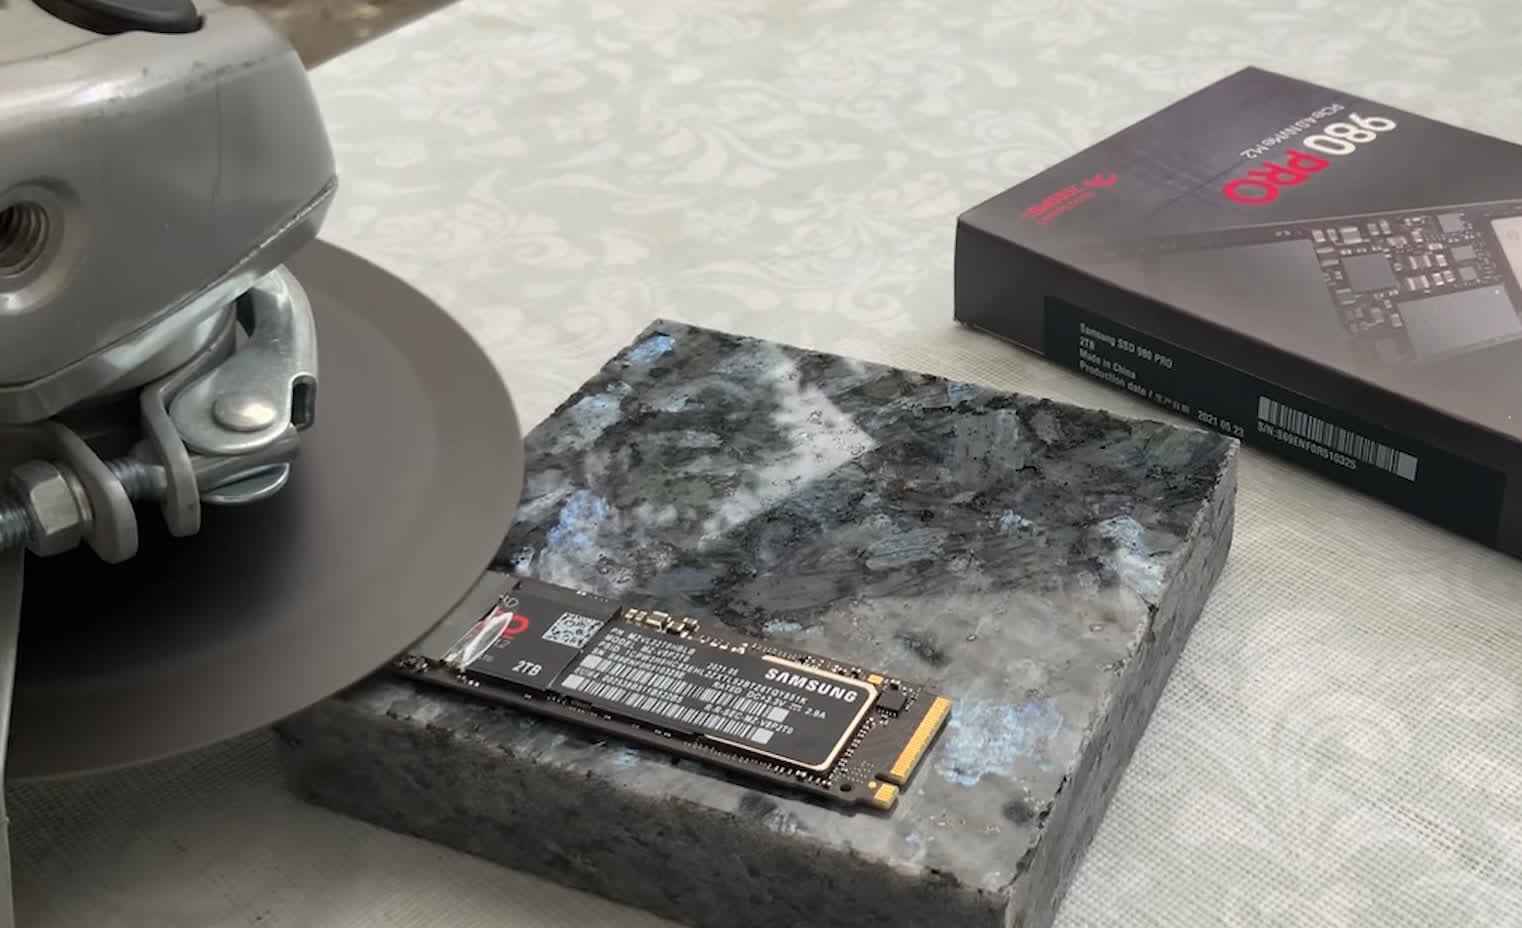 Samsung asks customer to destroy 980 Pro SSD with a drill before returning it for RMA